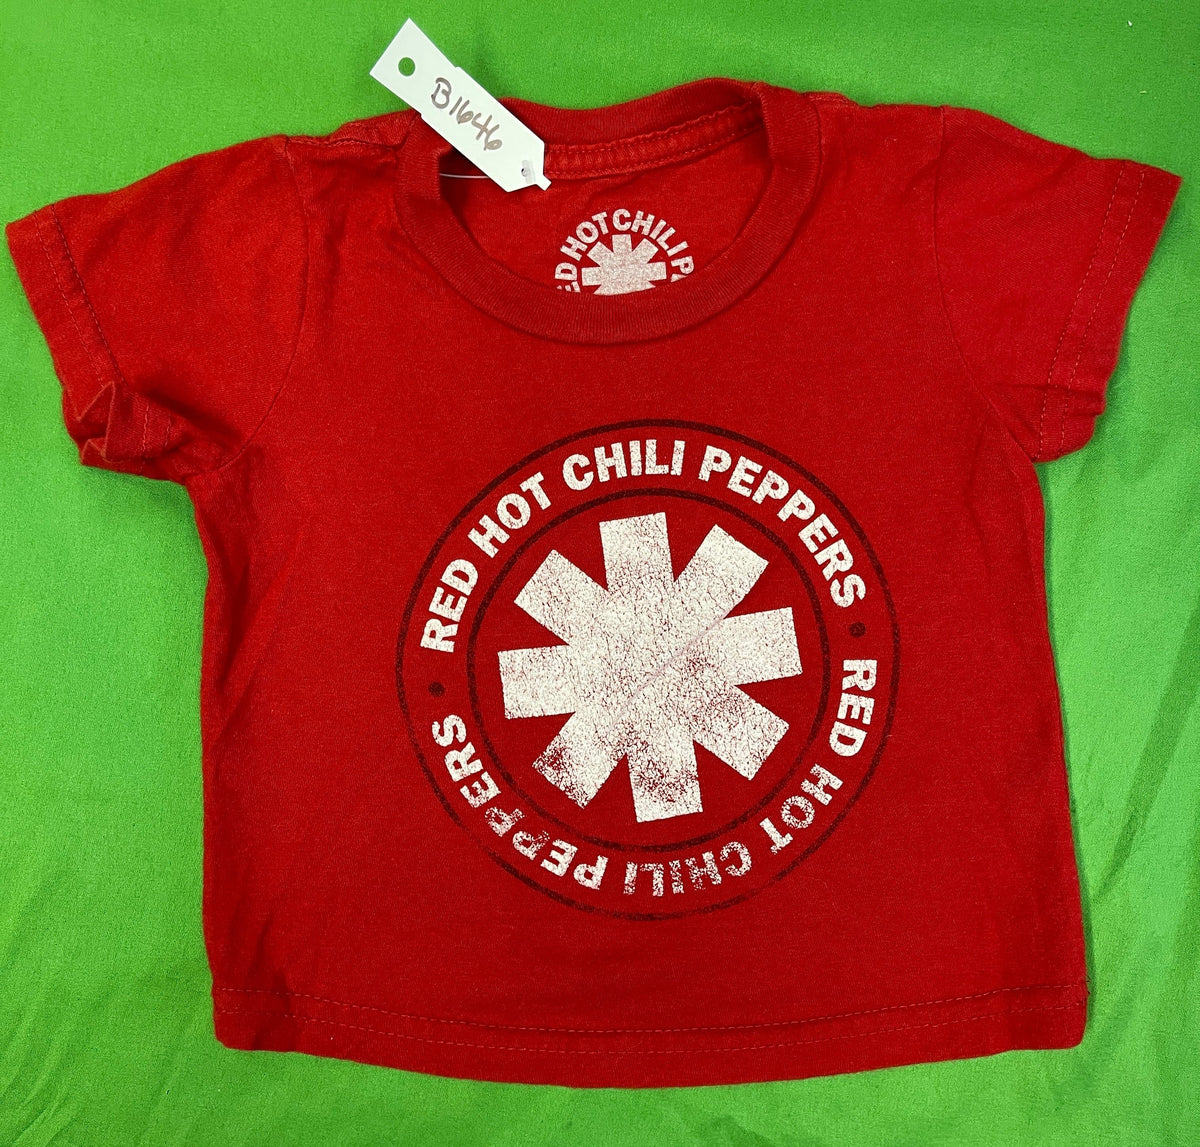 Red Hot Chili Peppers Red Band T-Shirt Baby Toddler Infant 12 Months